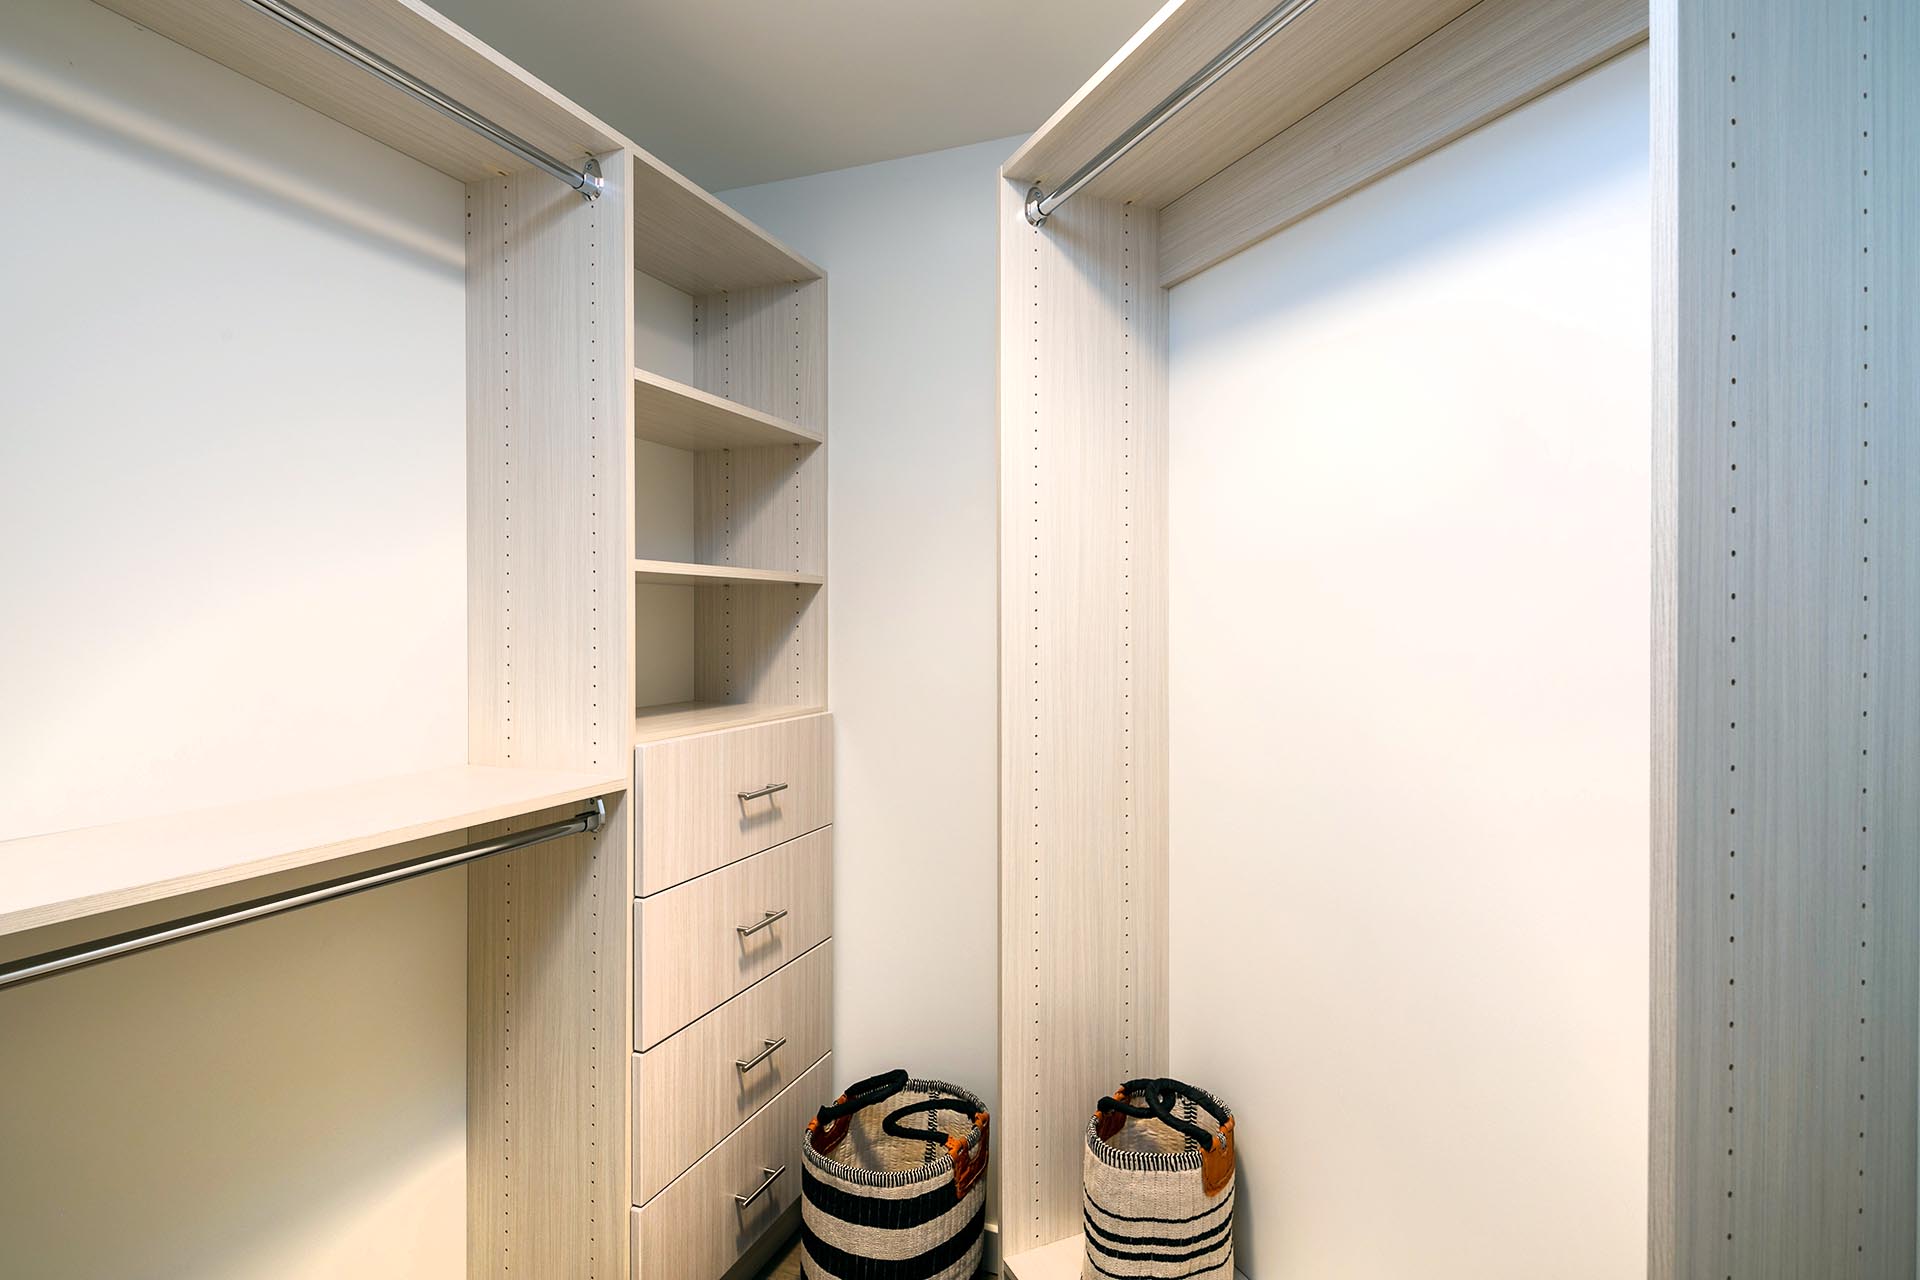 Spacious closet with lots of shelf space and hanger rods